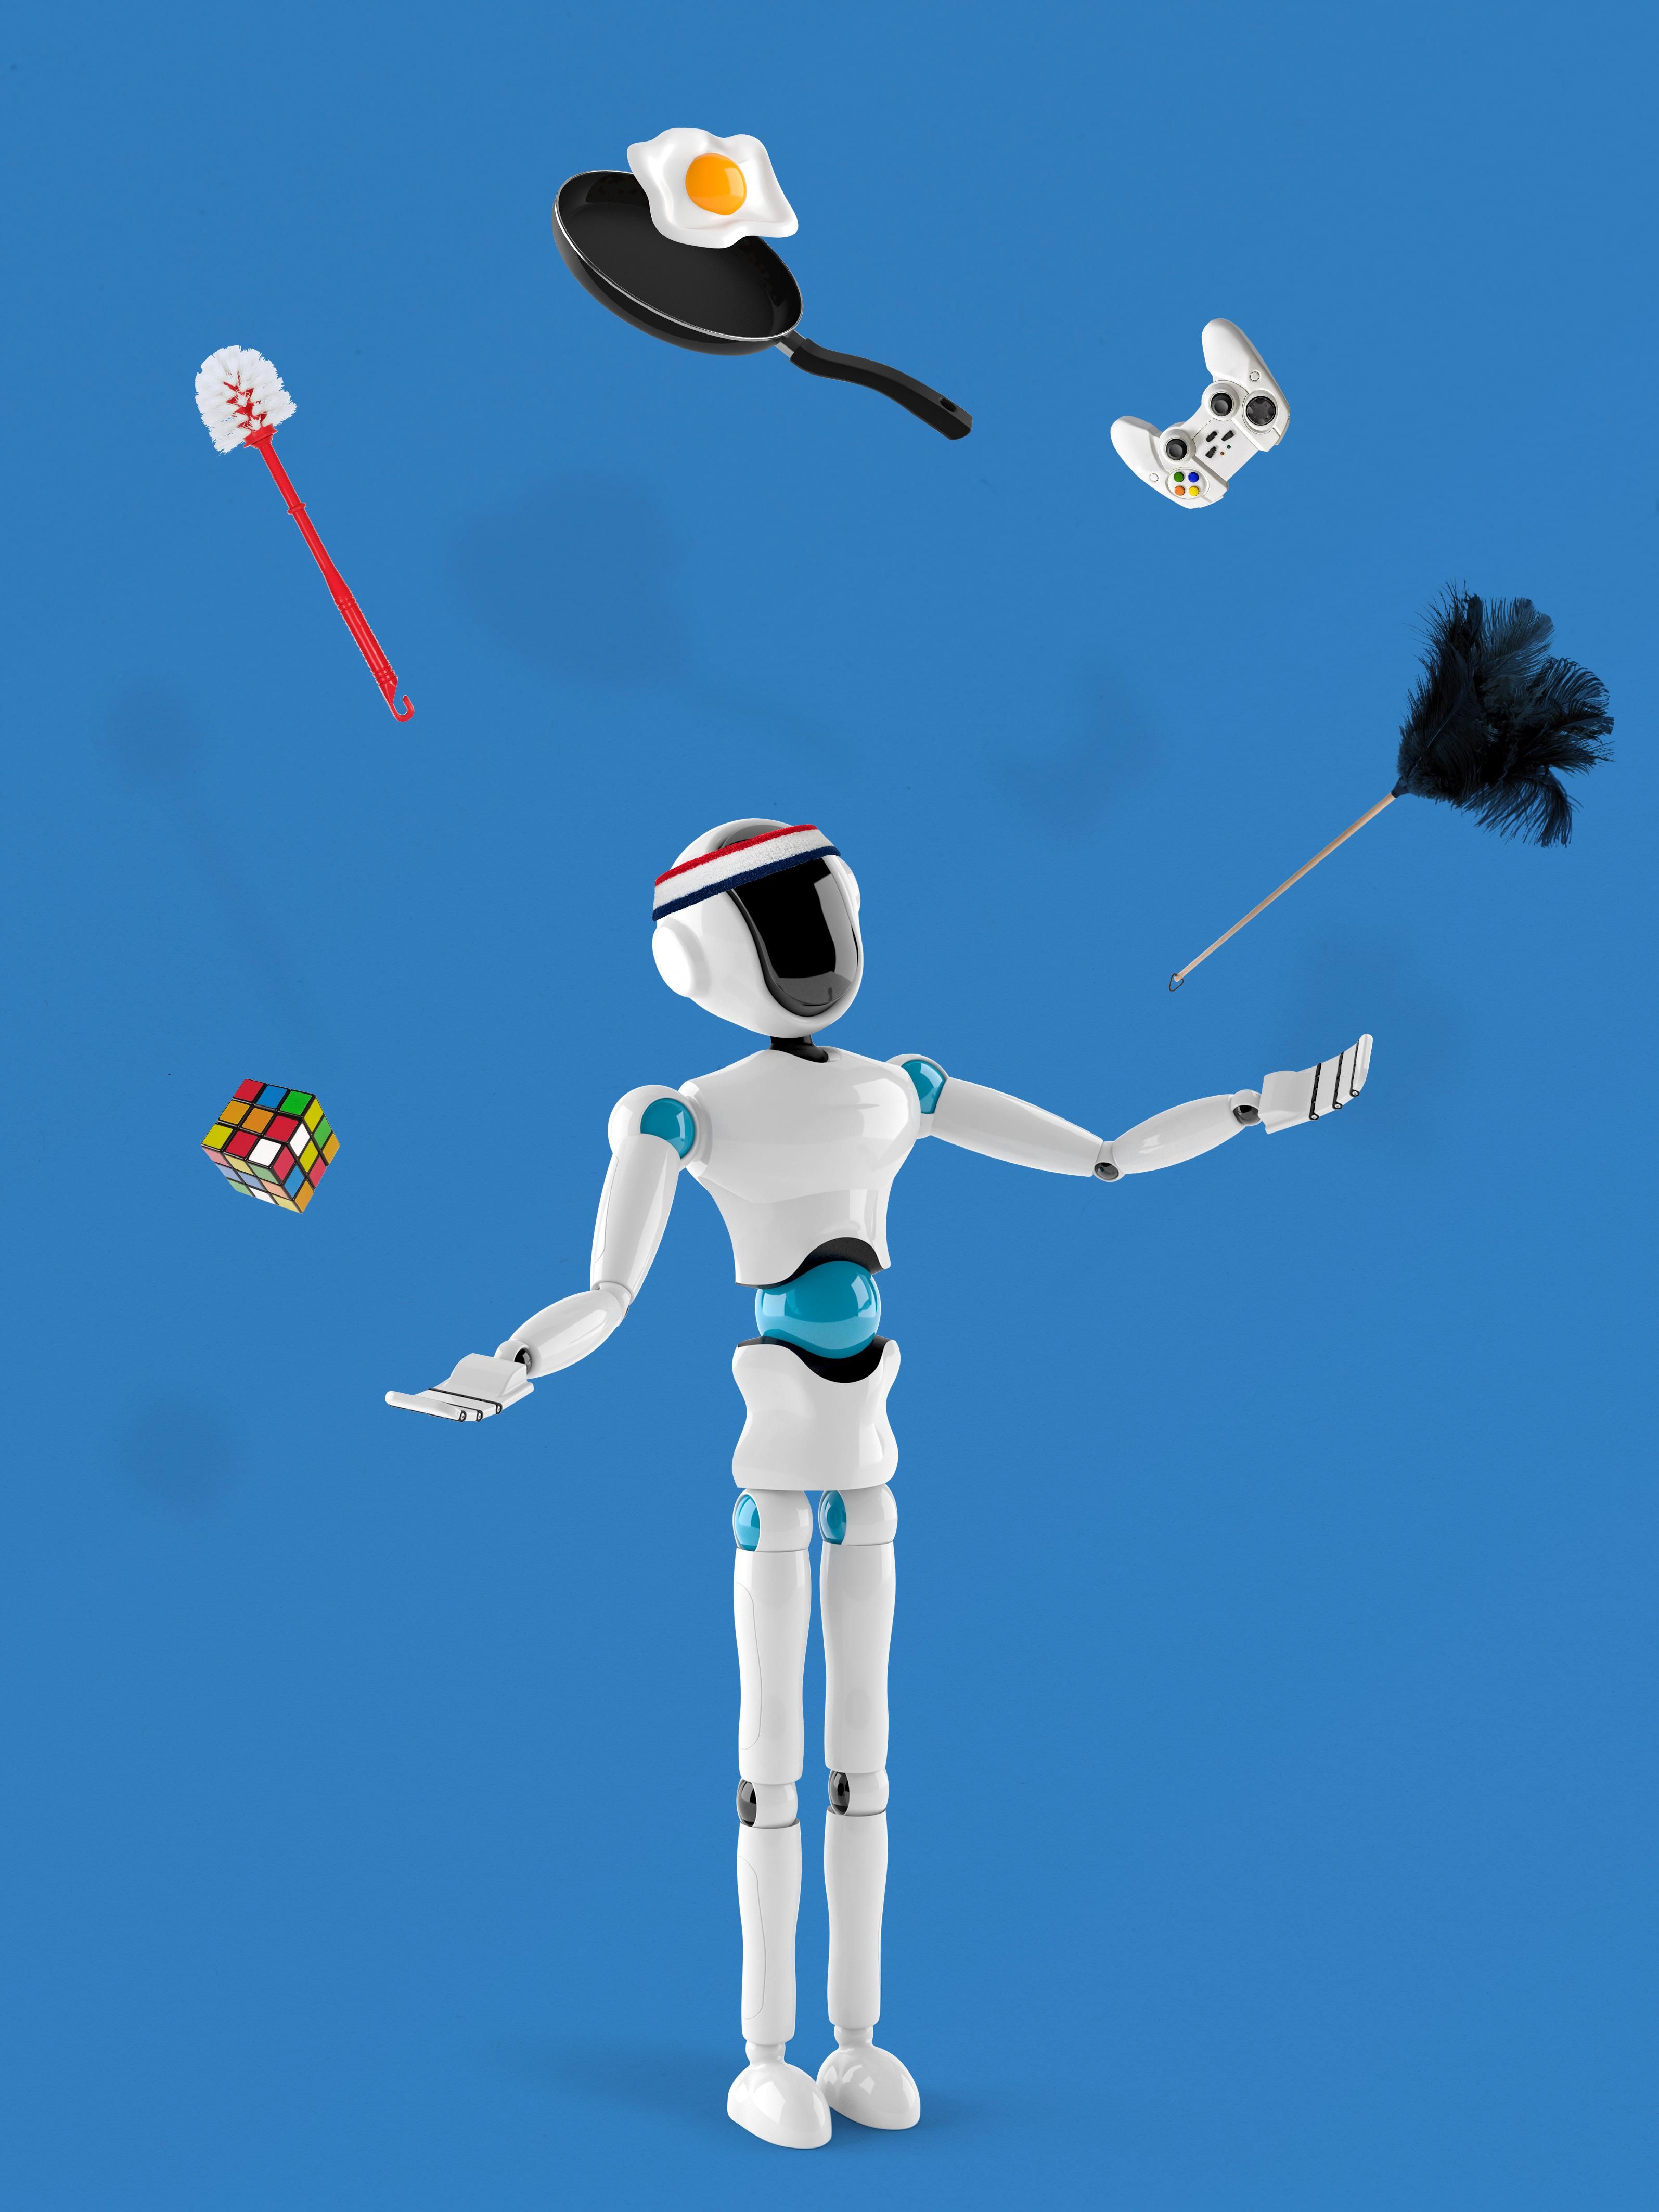 Image of a robot juggling multiple items into the air.